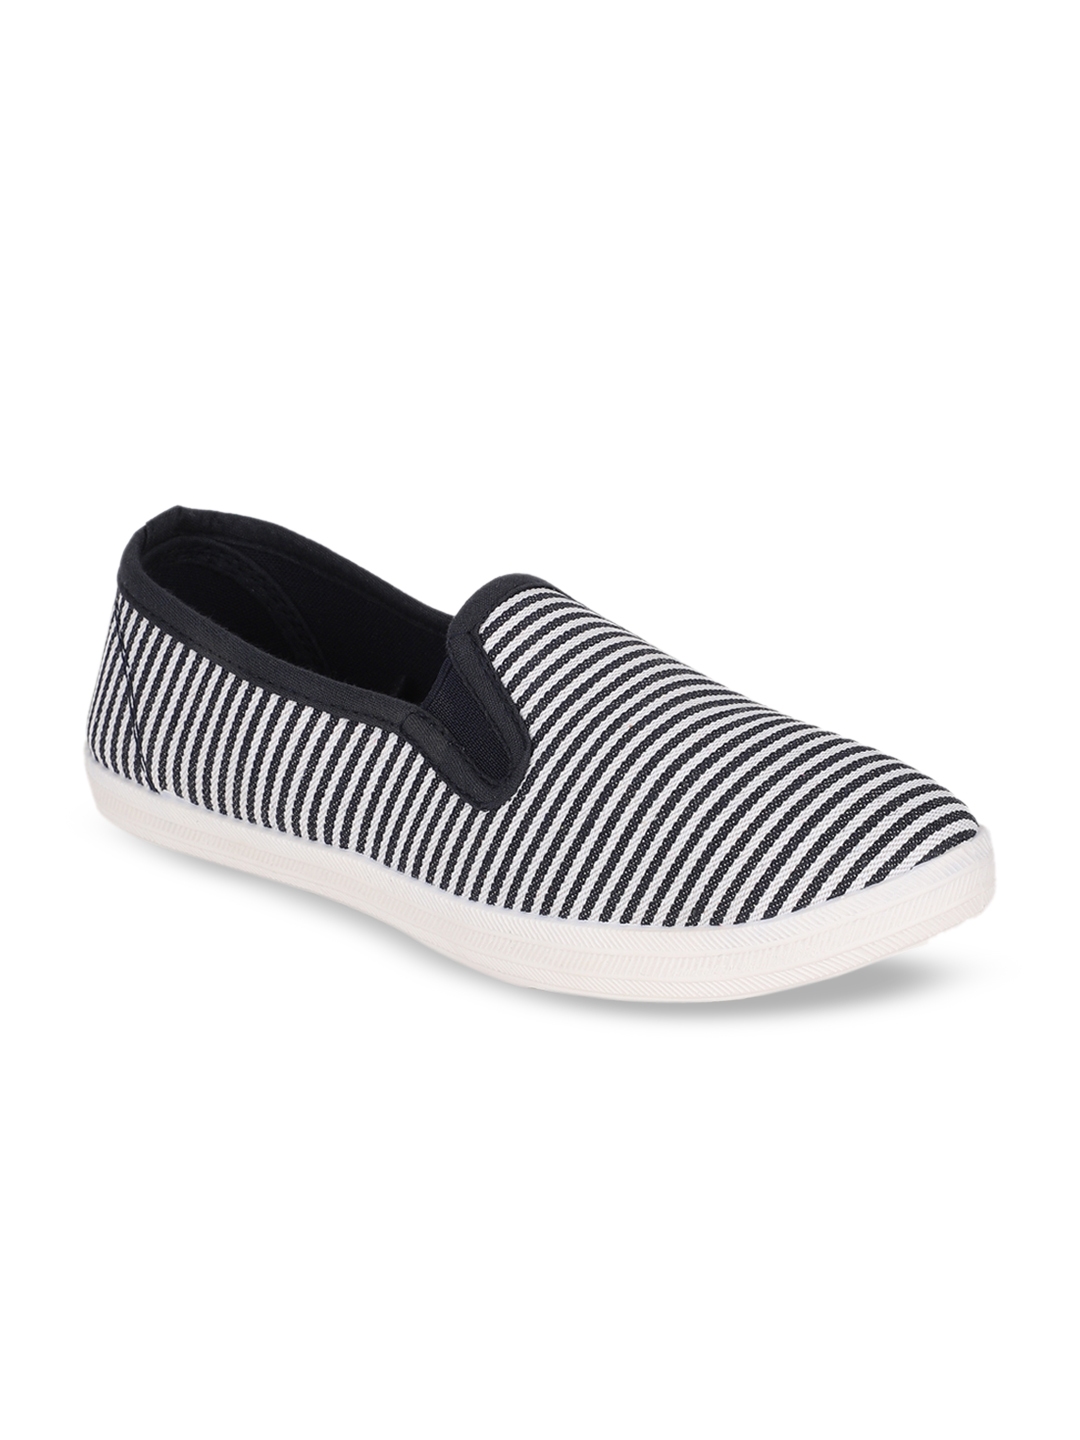 Buy People Women White & Black Striped Slip On Sneakers - Casual Shoes ...